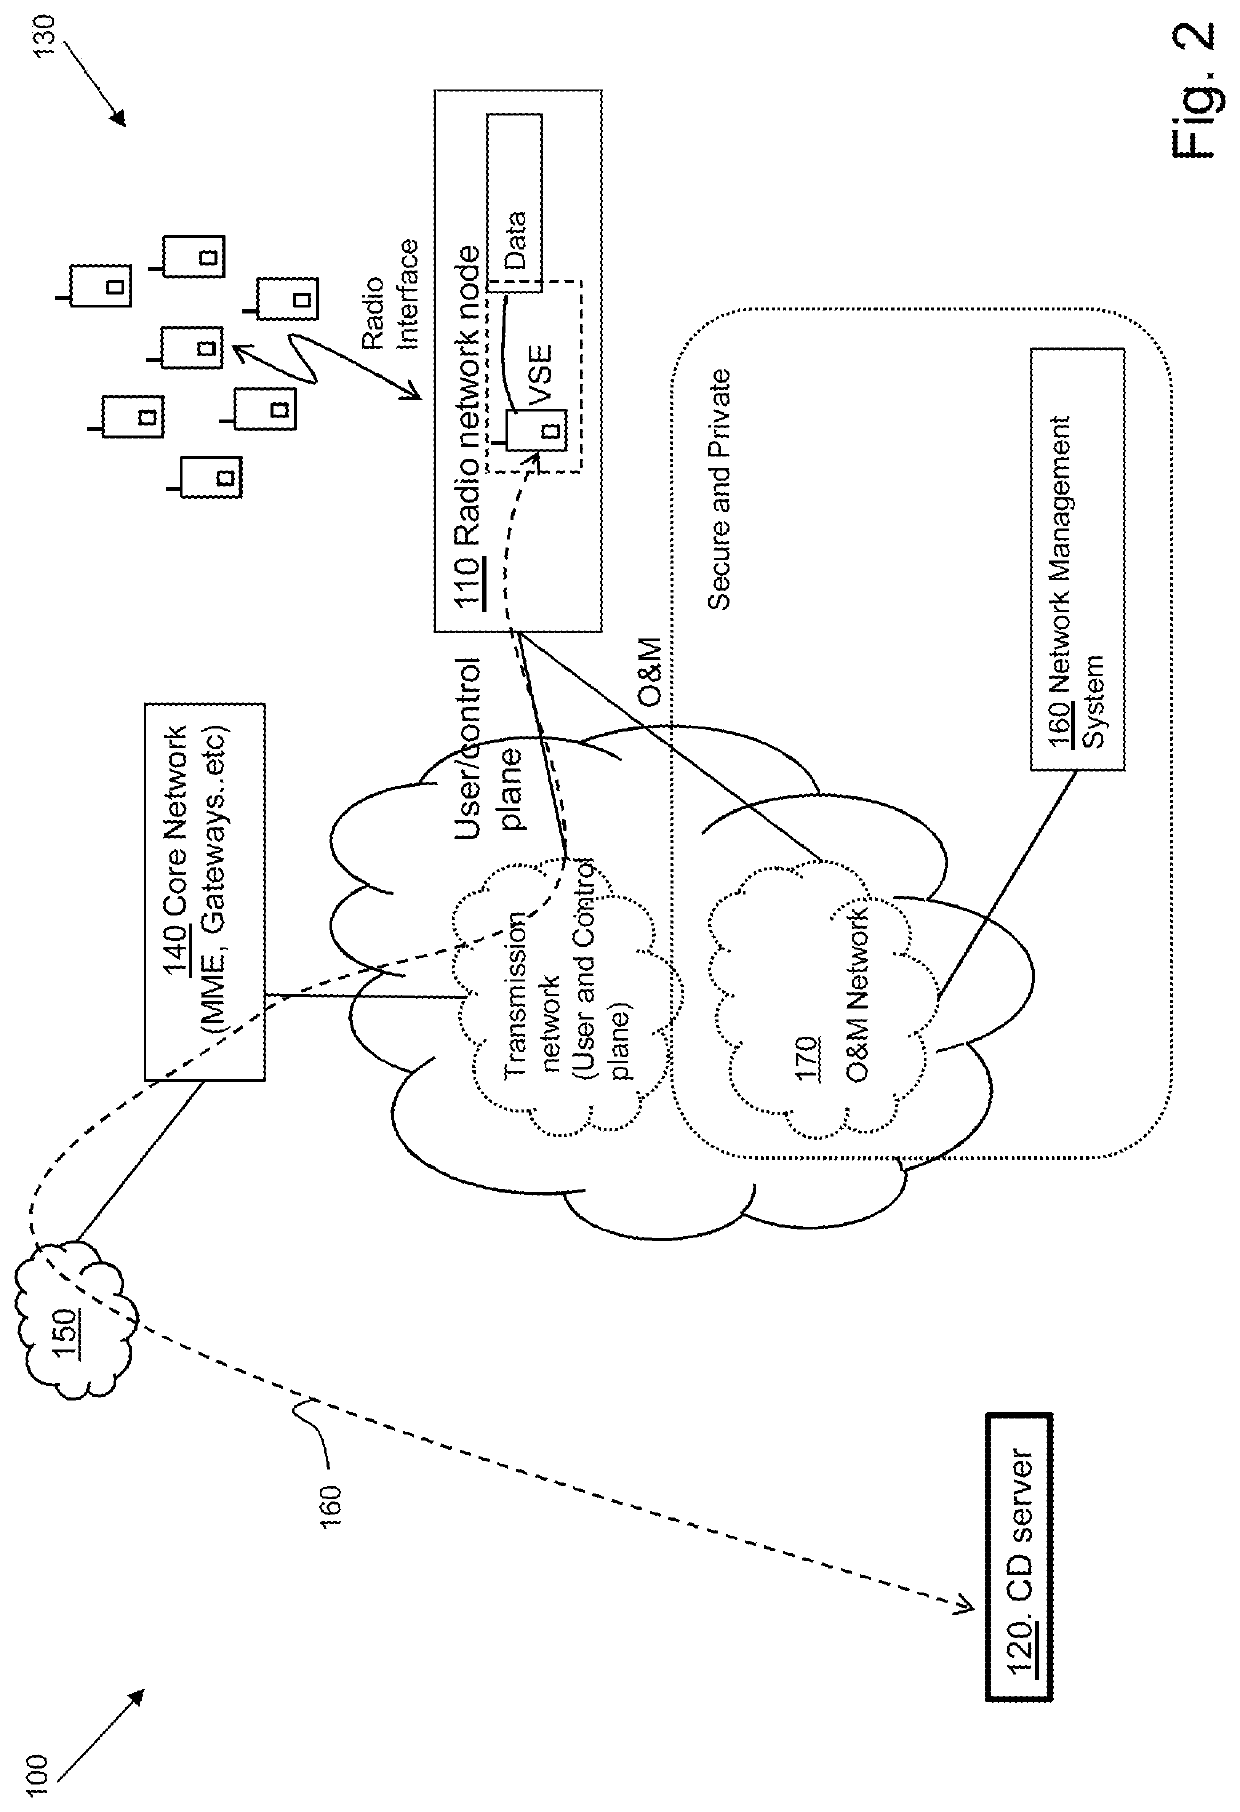 Method for performing continuous deployment and feedback from a radio network node